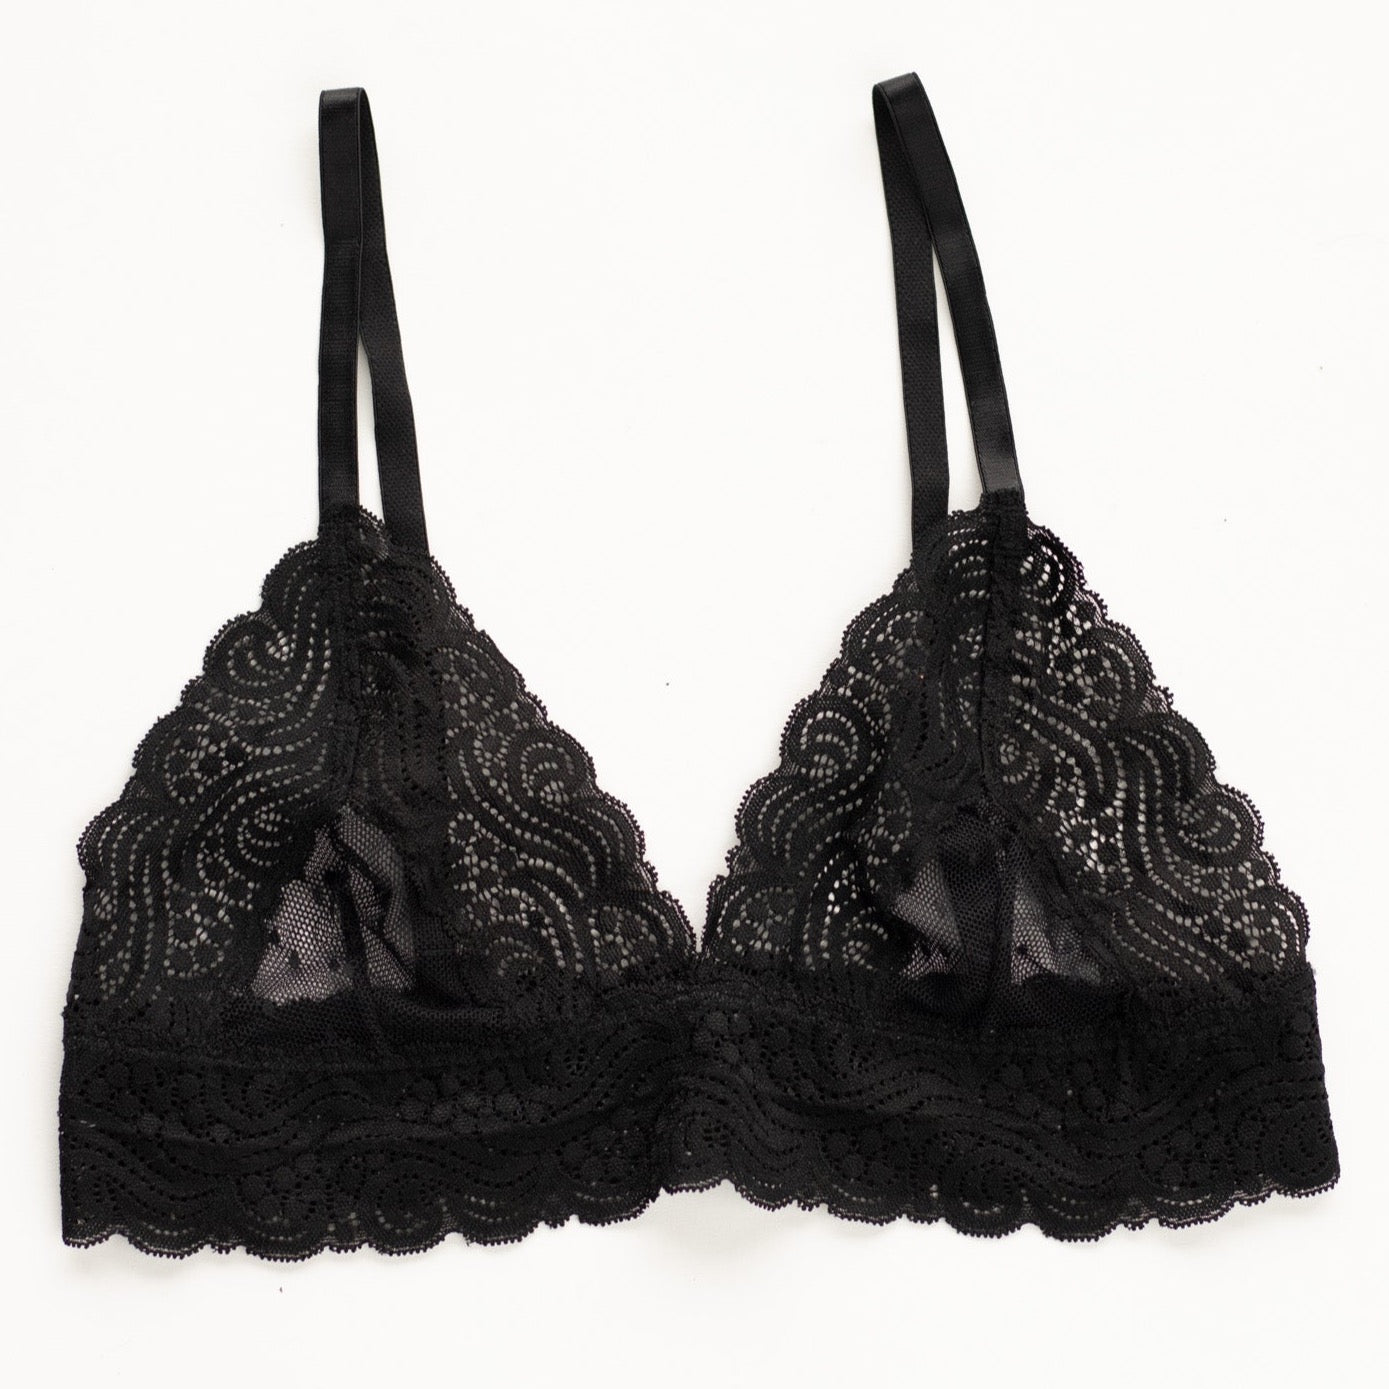 A black lace bralette on a white background.